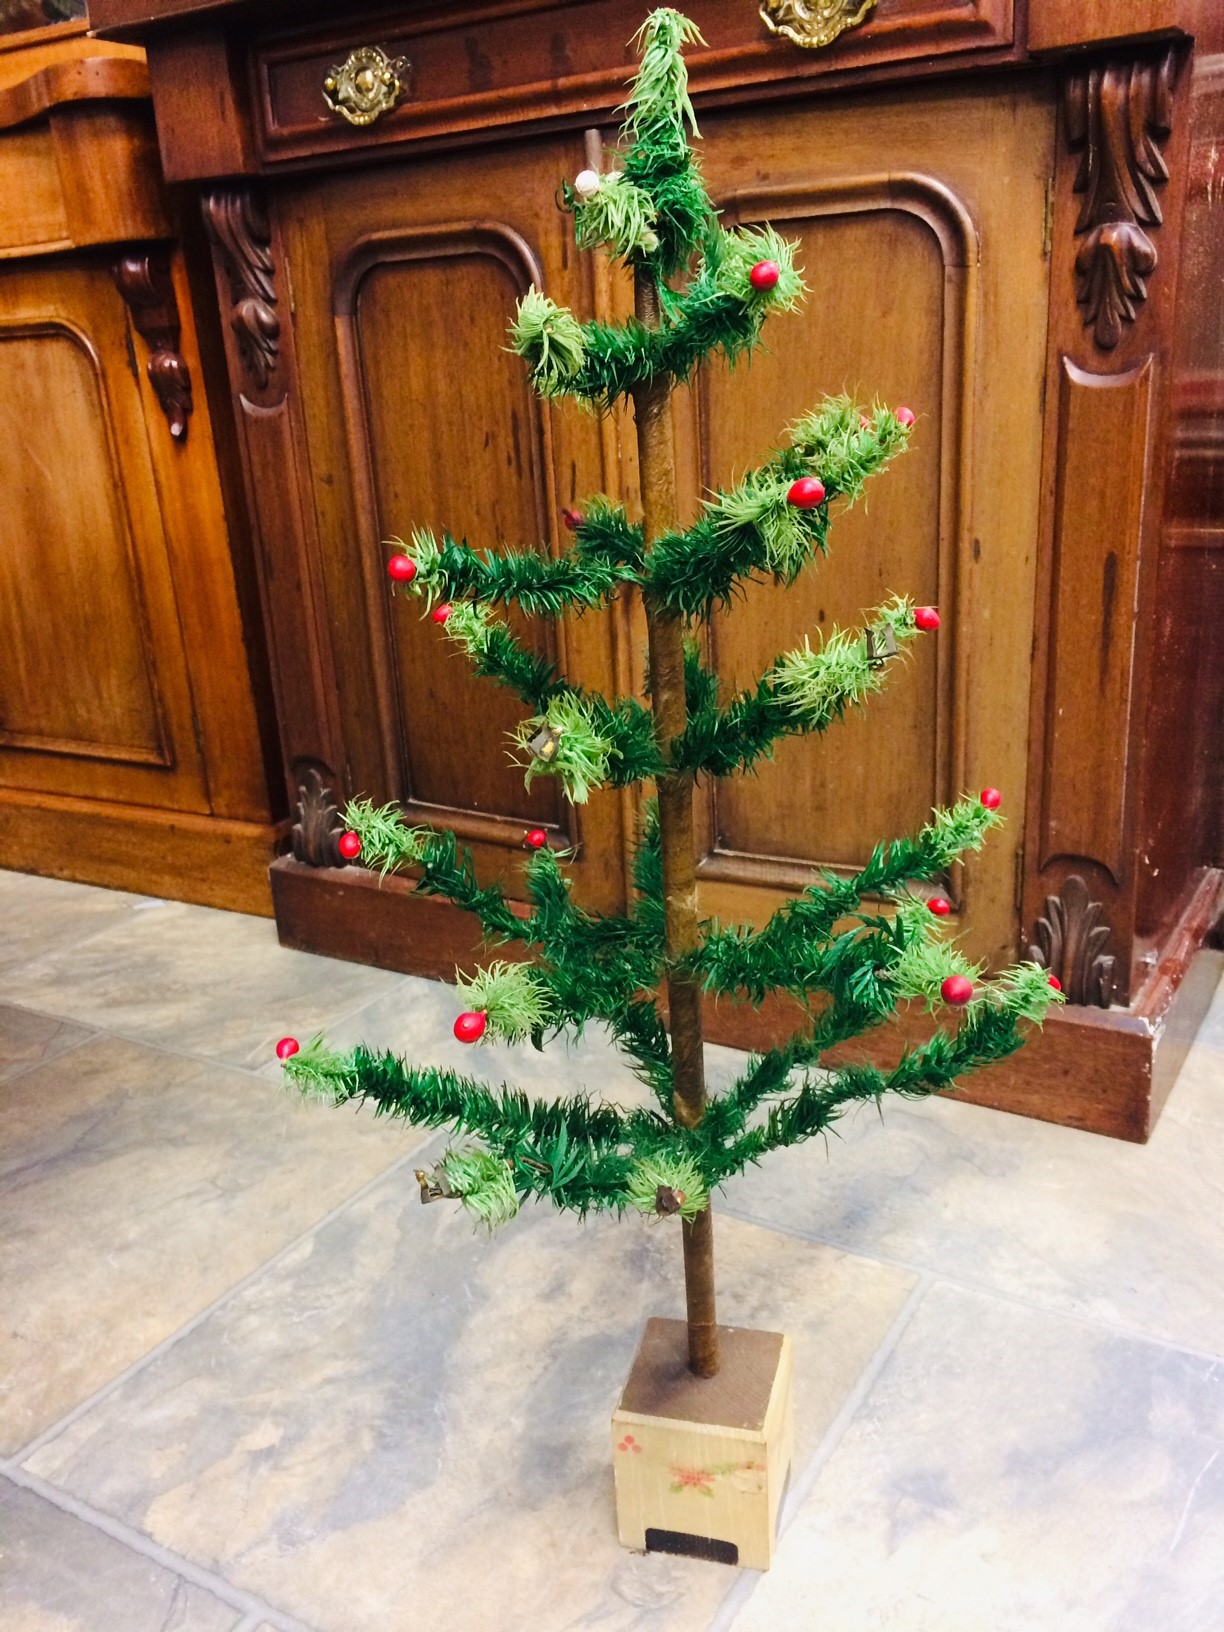 The vintage Christmas tree from Woolworths